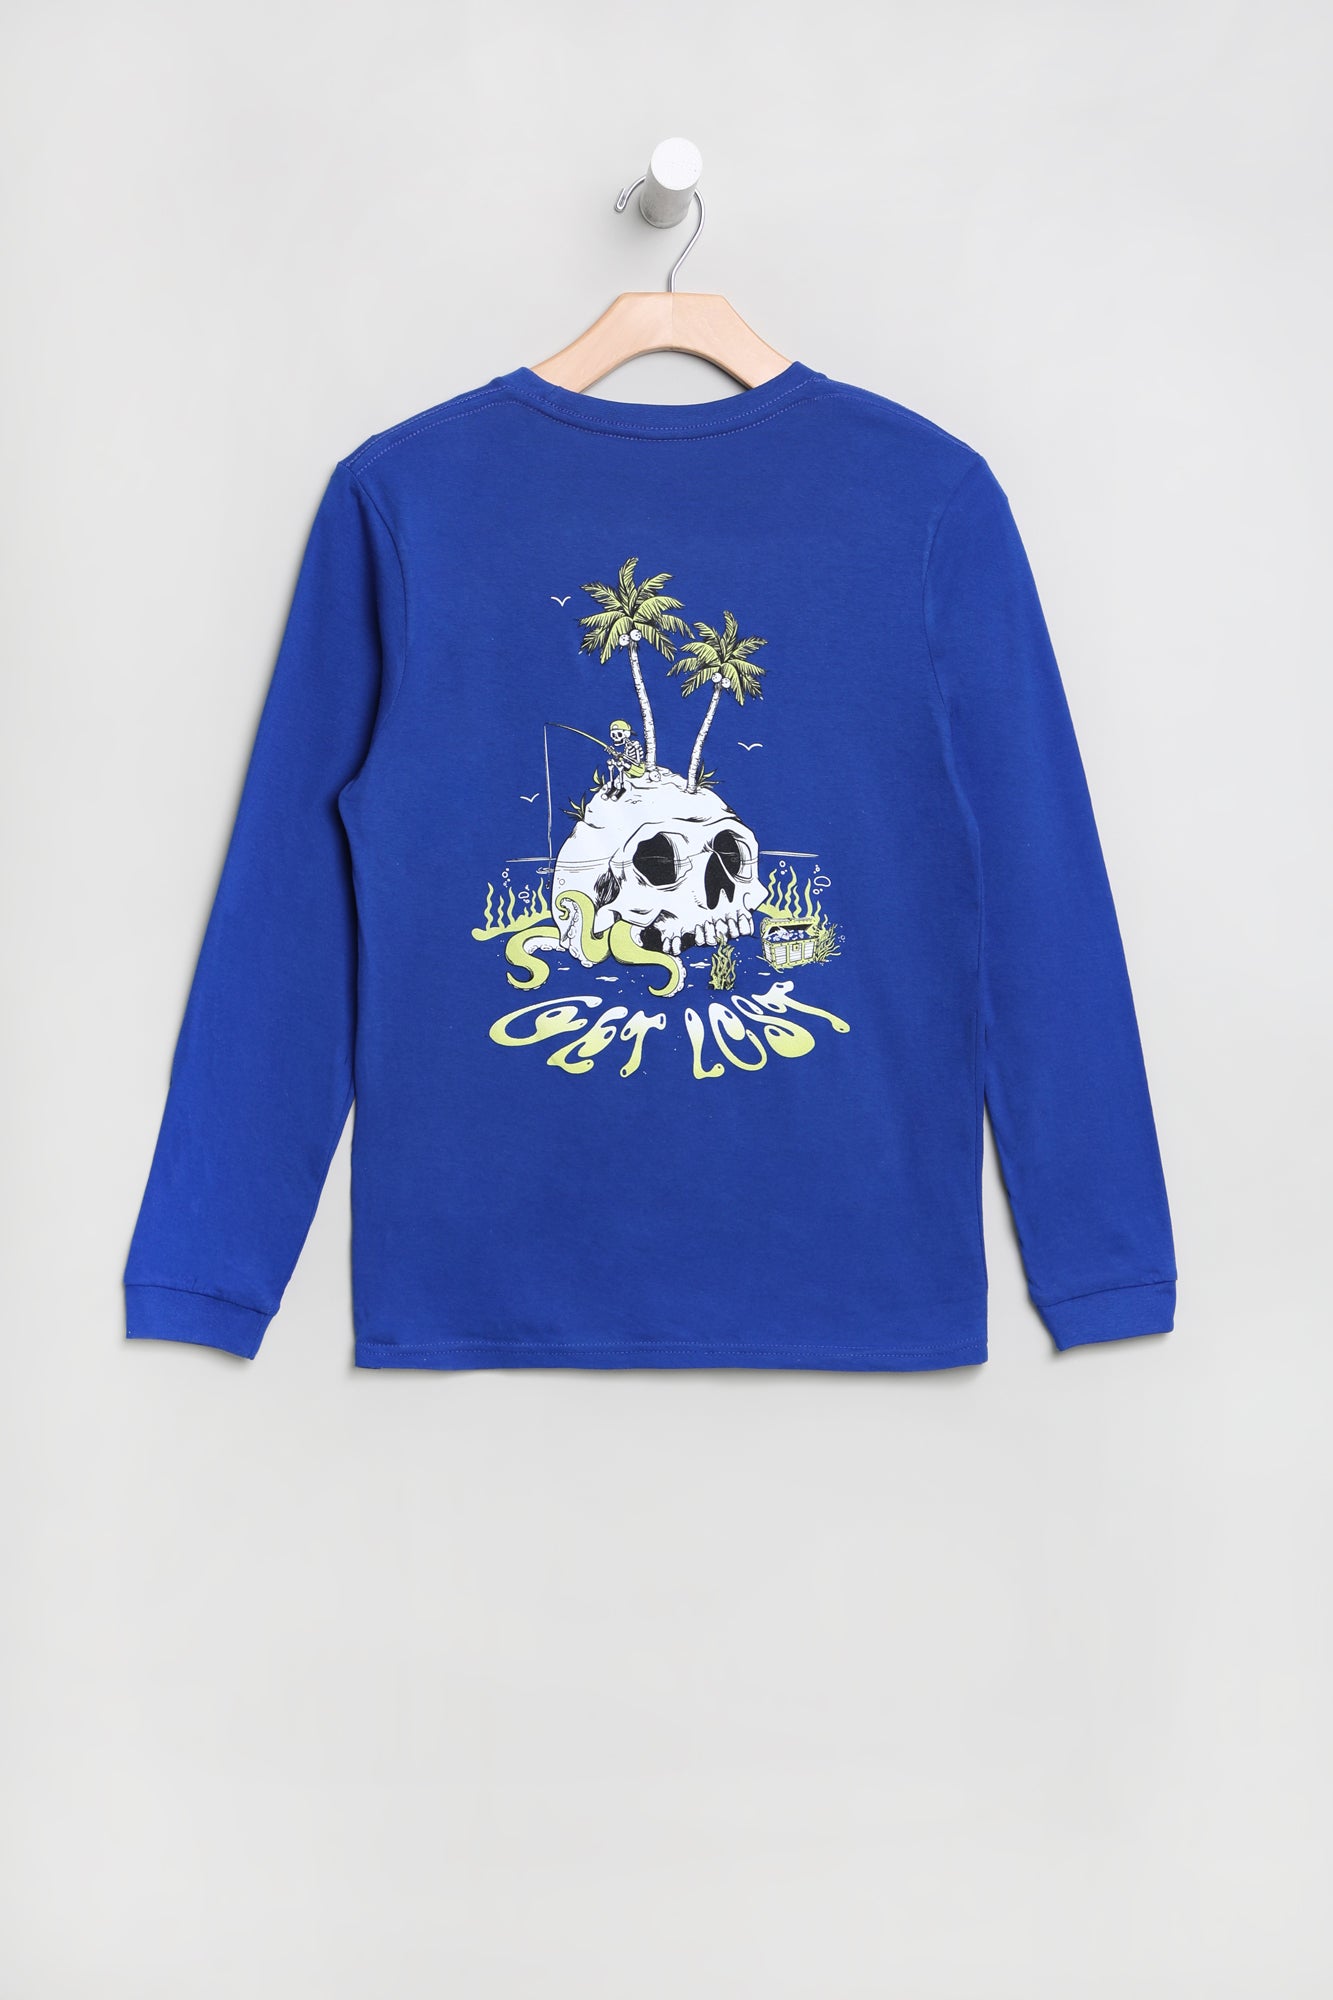 Arsenic Youth Get Lost Long Sleeve Top - Blue /